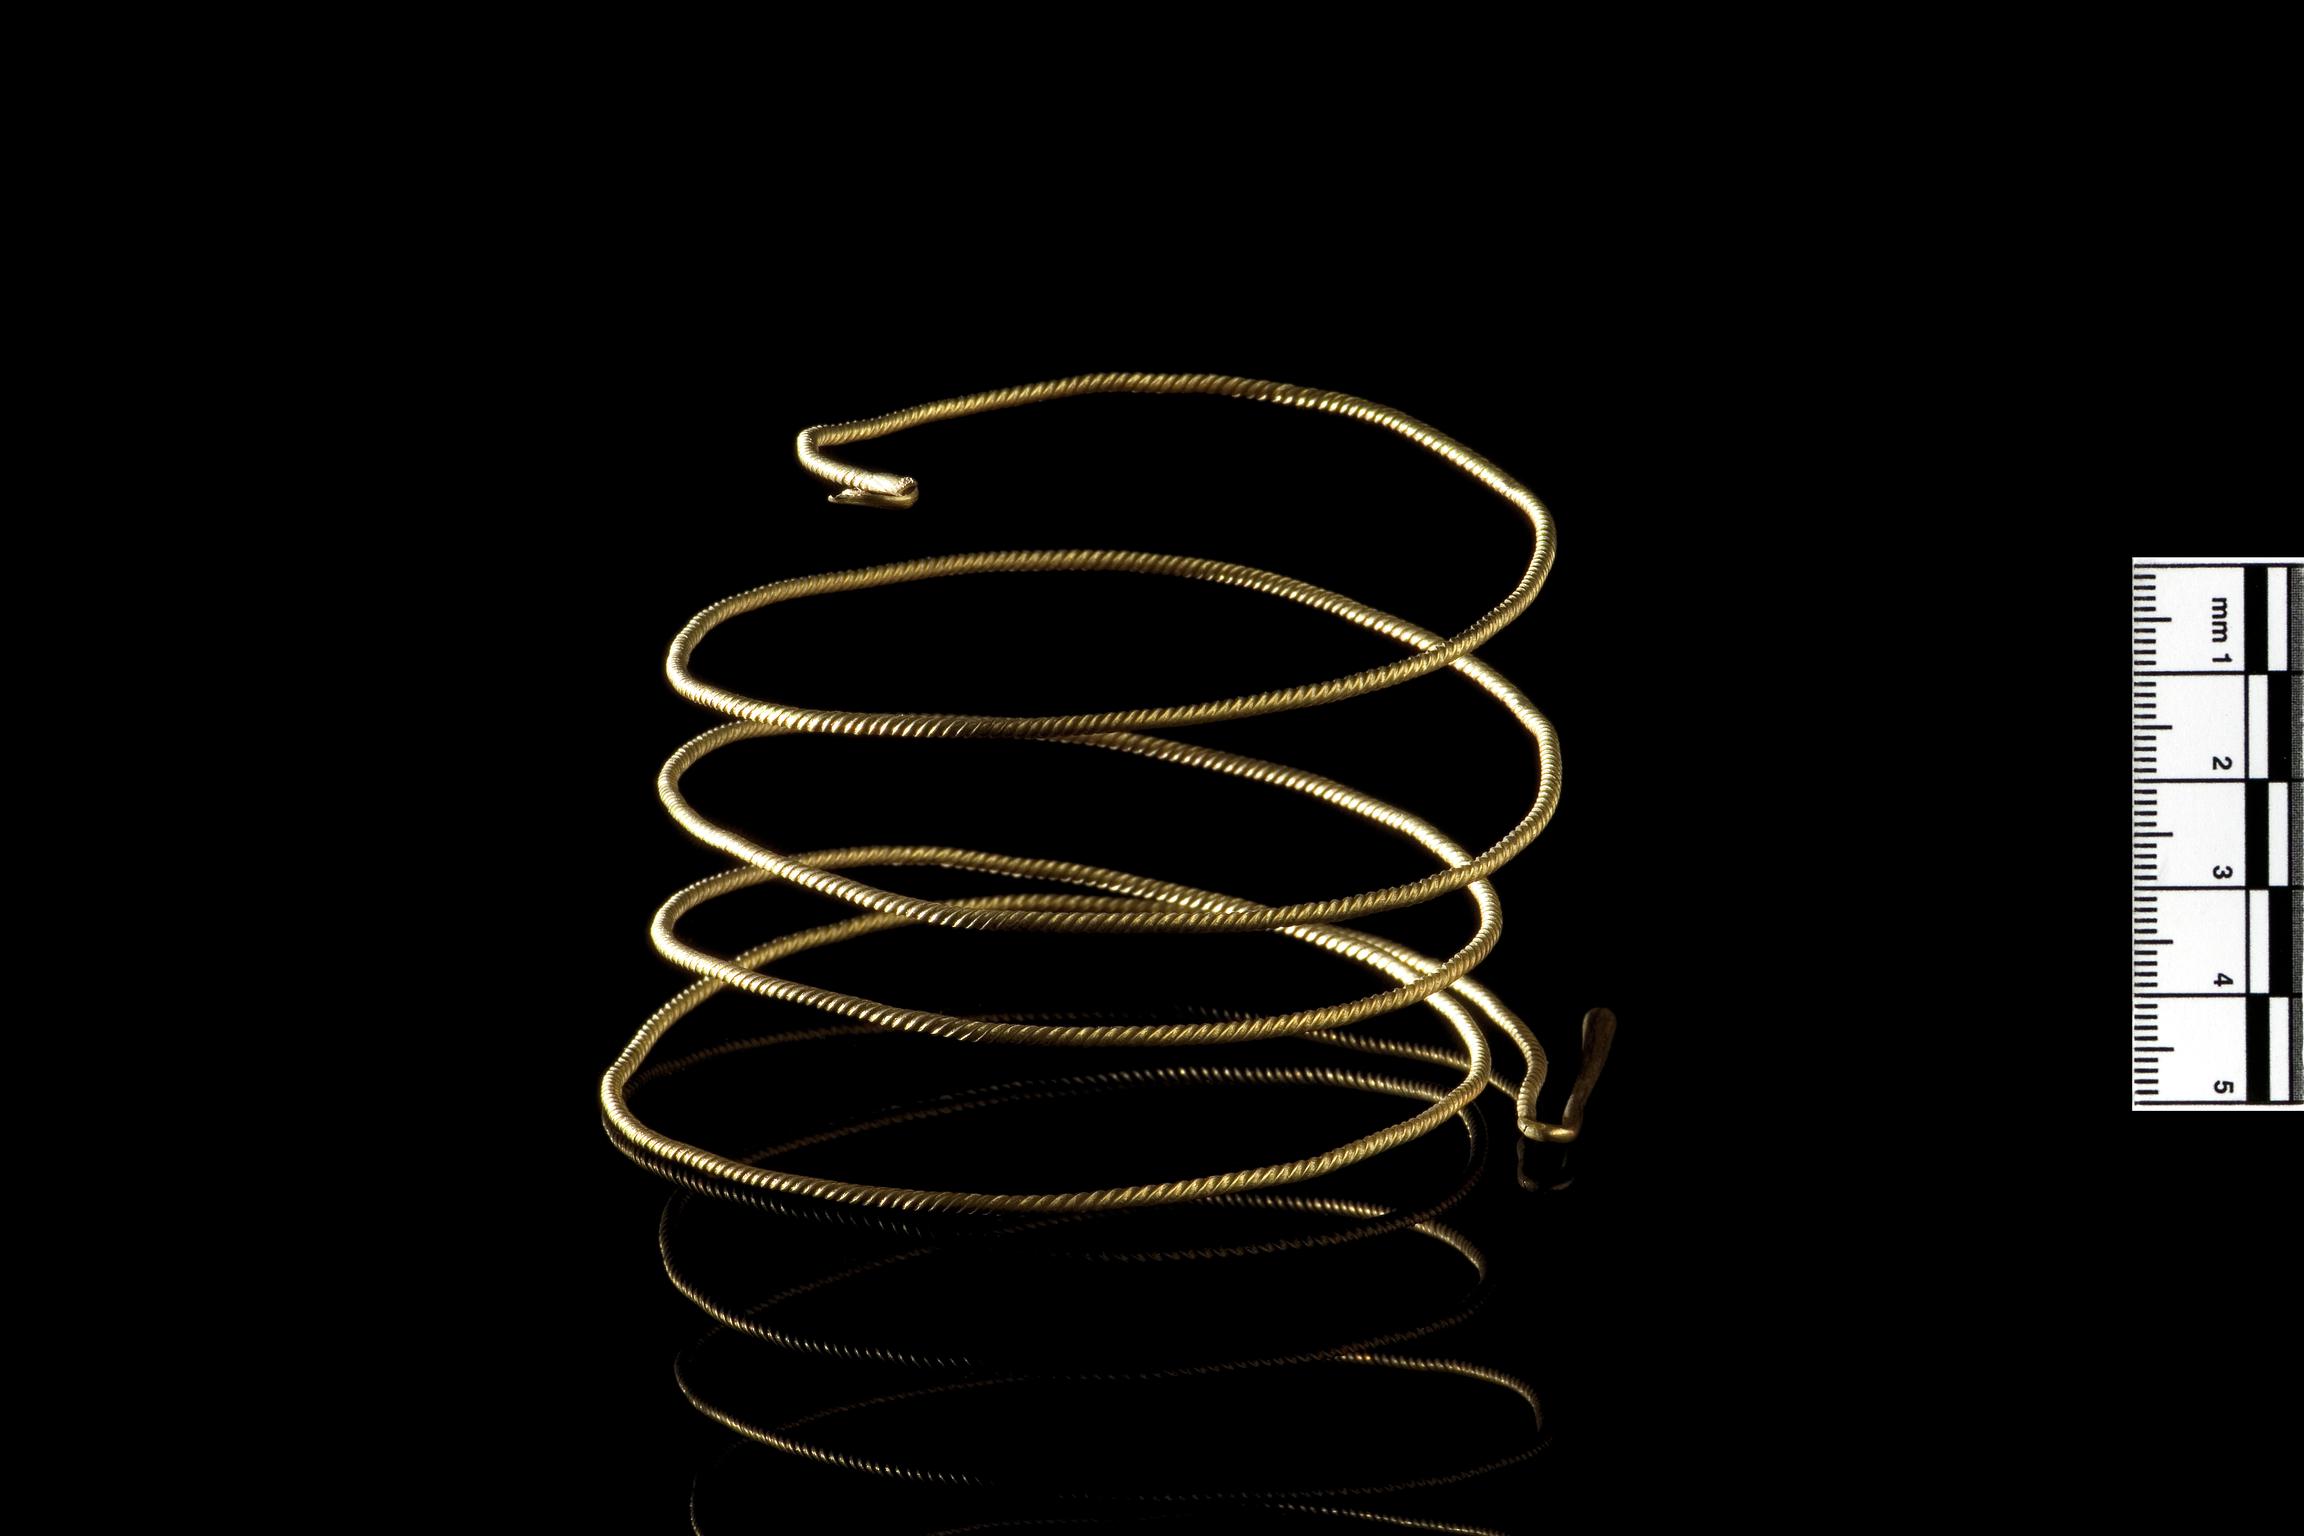 Middle Bronze Age gold bar-twisted torc